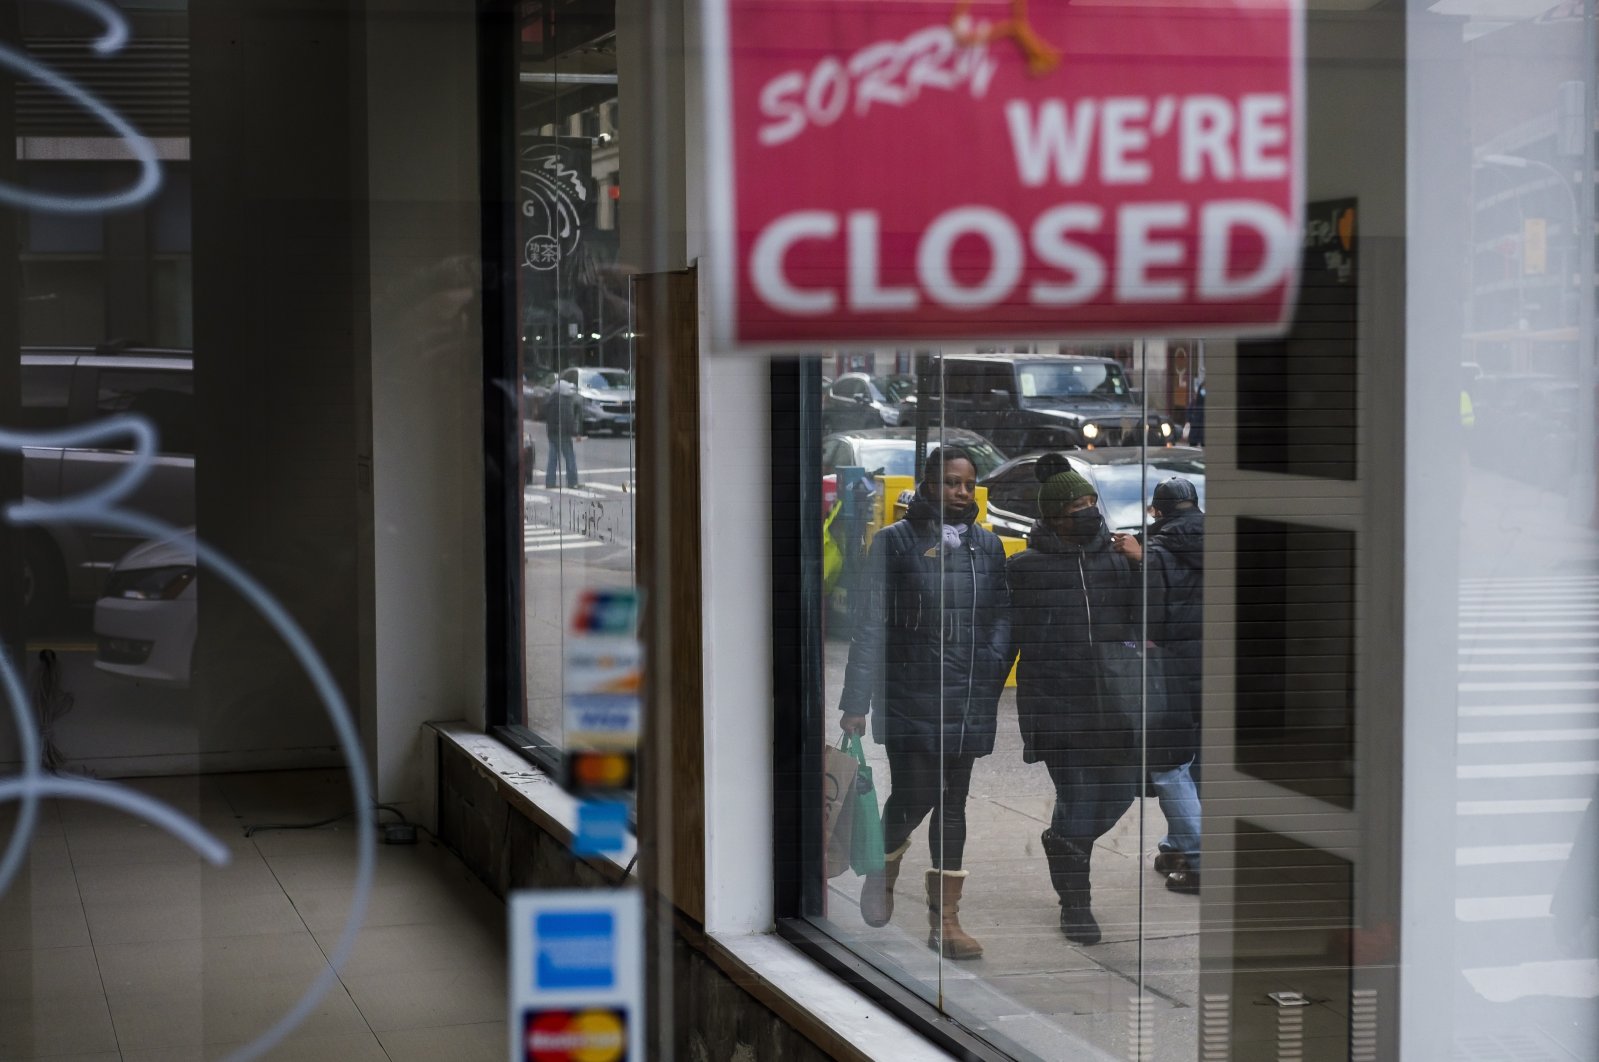 Pedestrians walk past a closed store in New York, New York, USA, on Jan. 8, 2021. (EPA Photo)